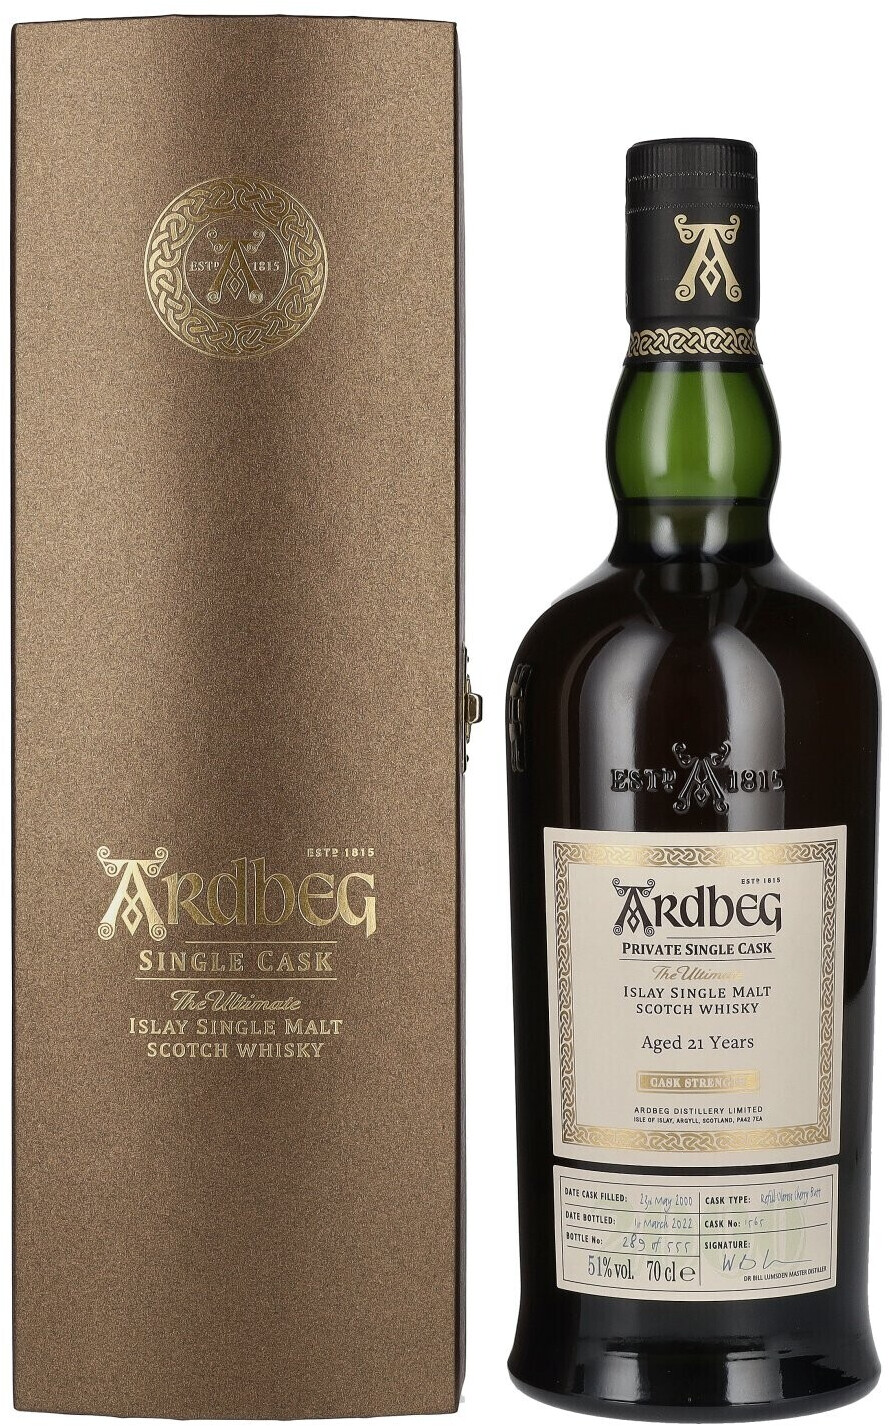 Cask Ardbeg Years ab Private 0,7l 51% The 2.087,91 Preisvergleich | Ultimate bei 21 Old € Whisky Single